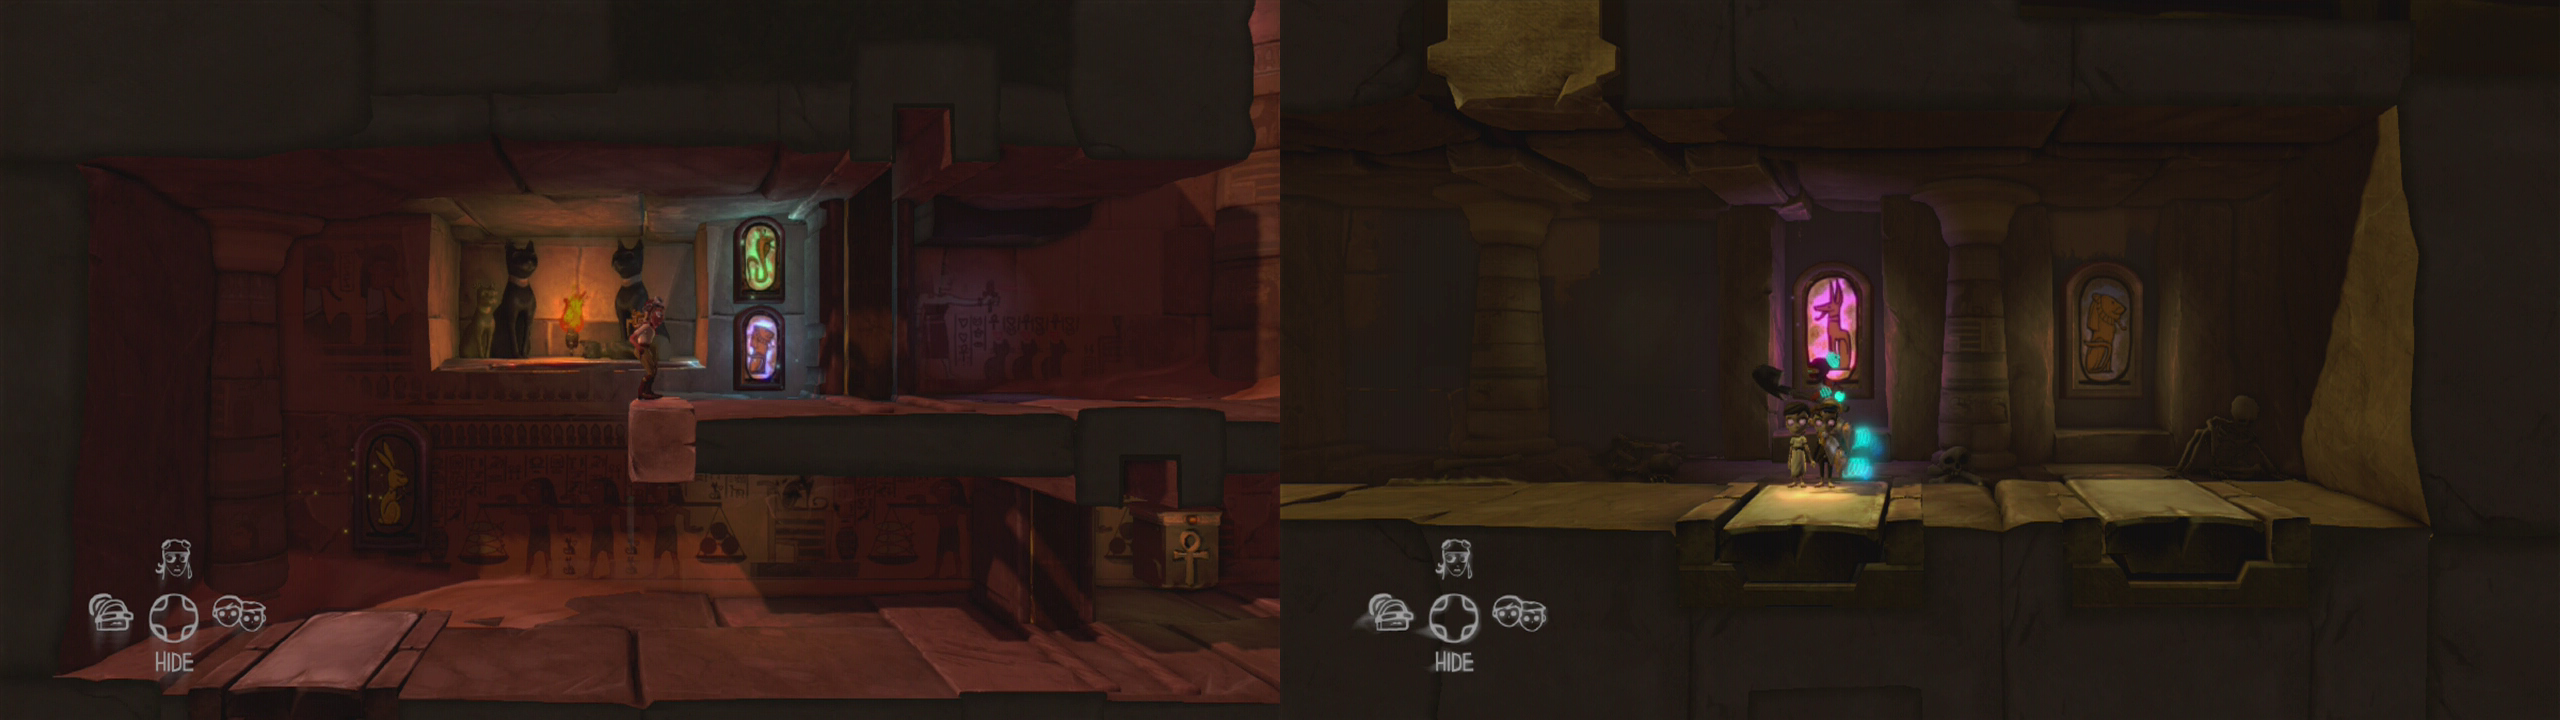 Use the adventurer to spot pictures on the walls (left). The two allies need to step on the relevant pressure plates (right).